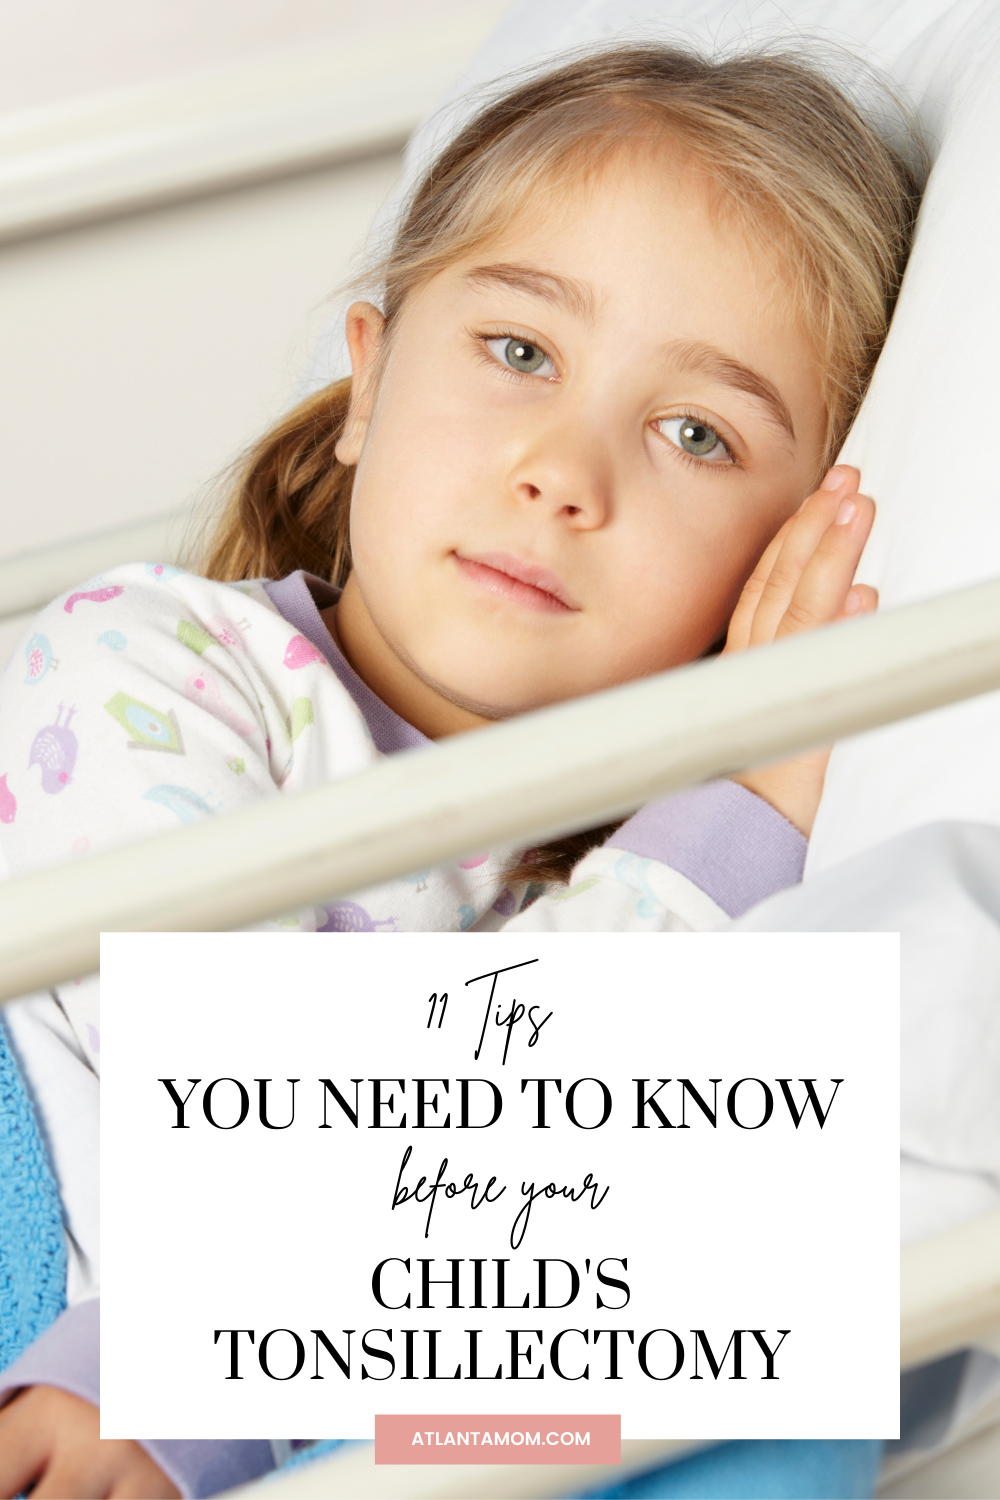 tips for your child's tonsillectomy